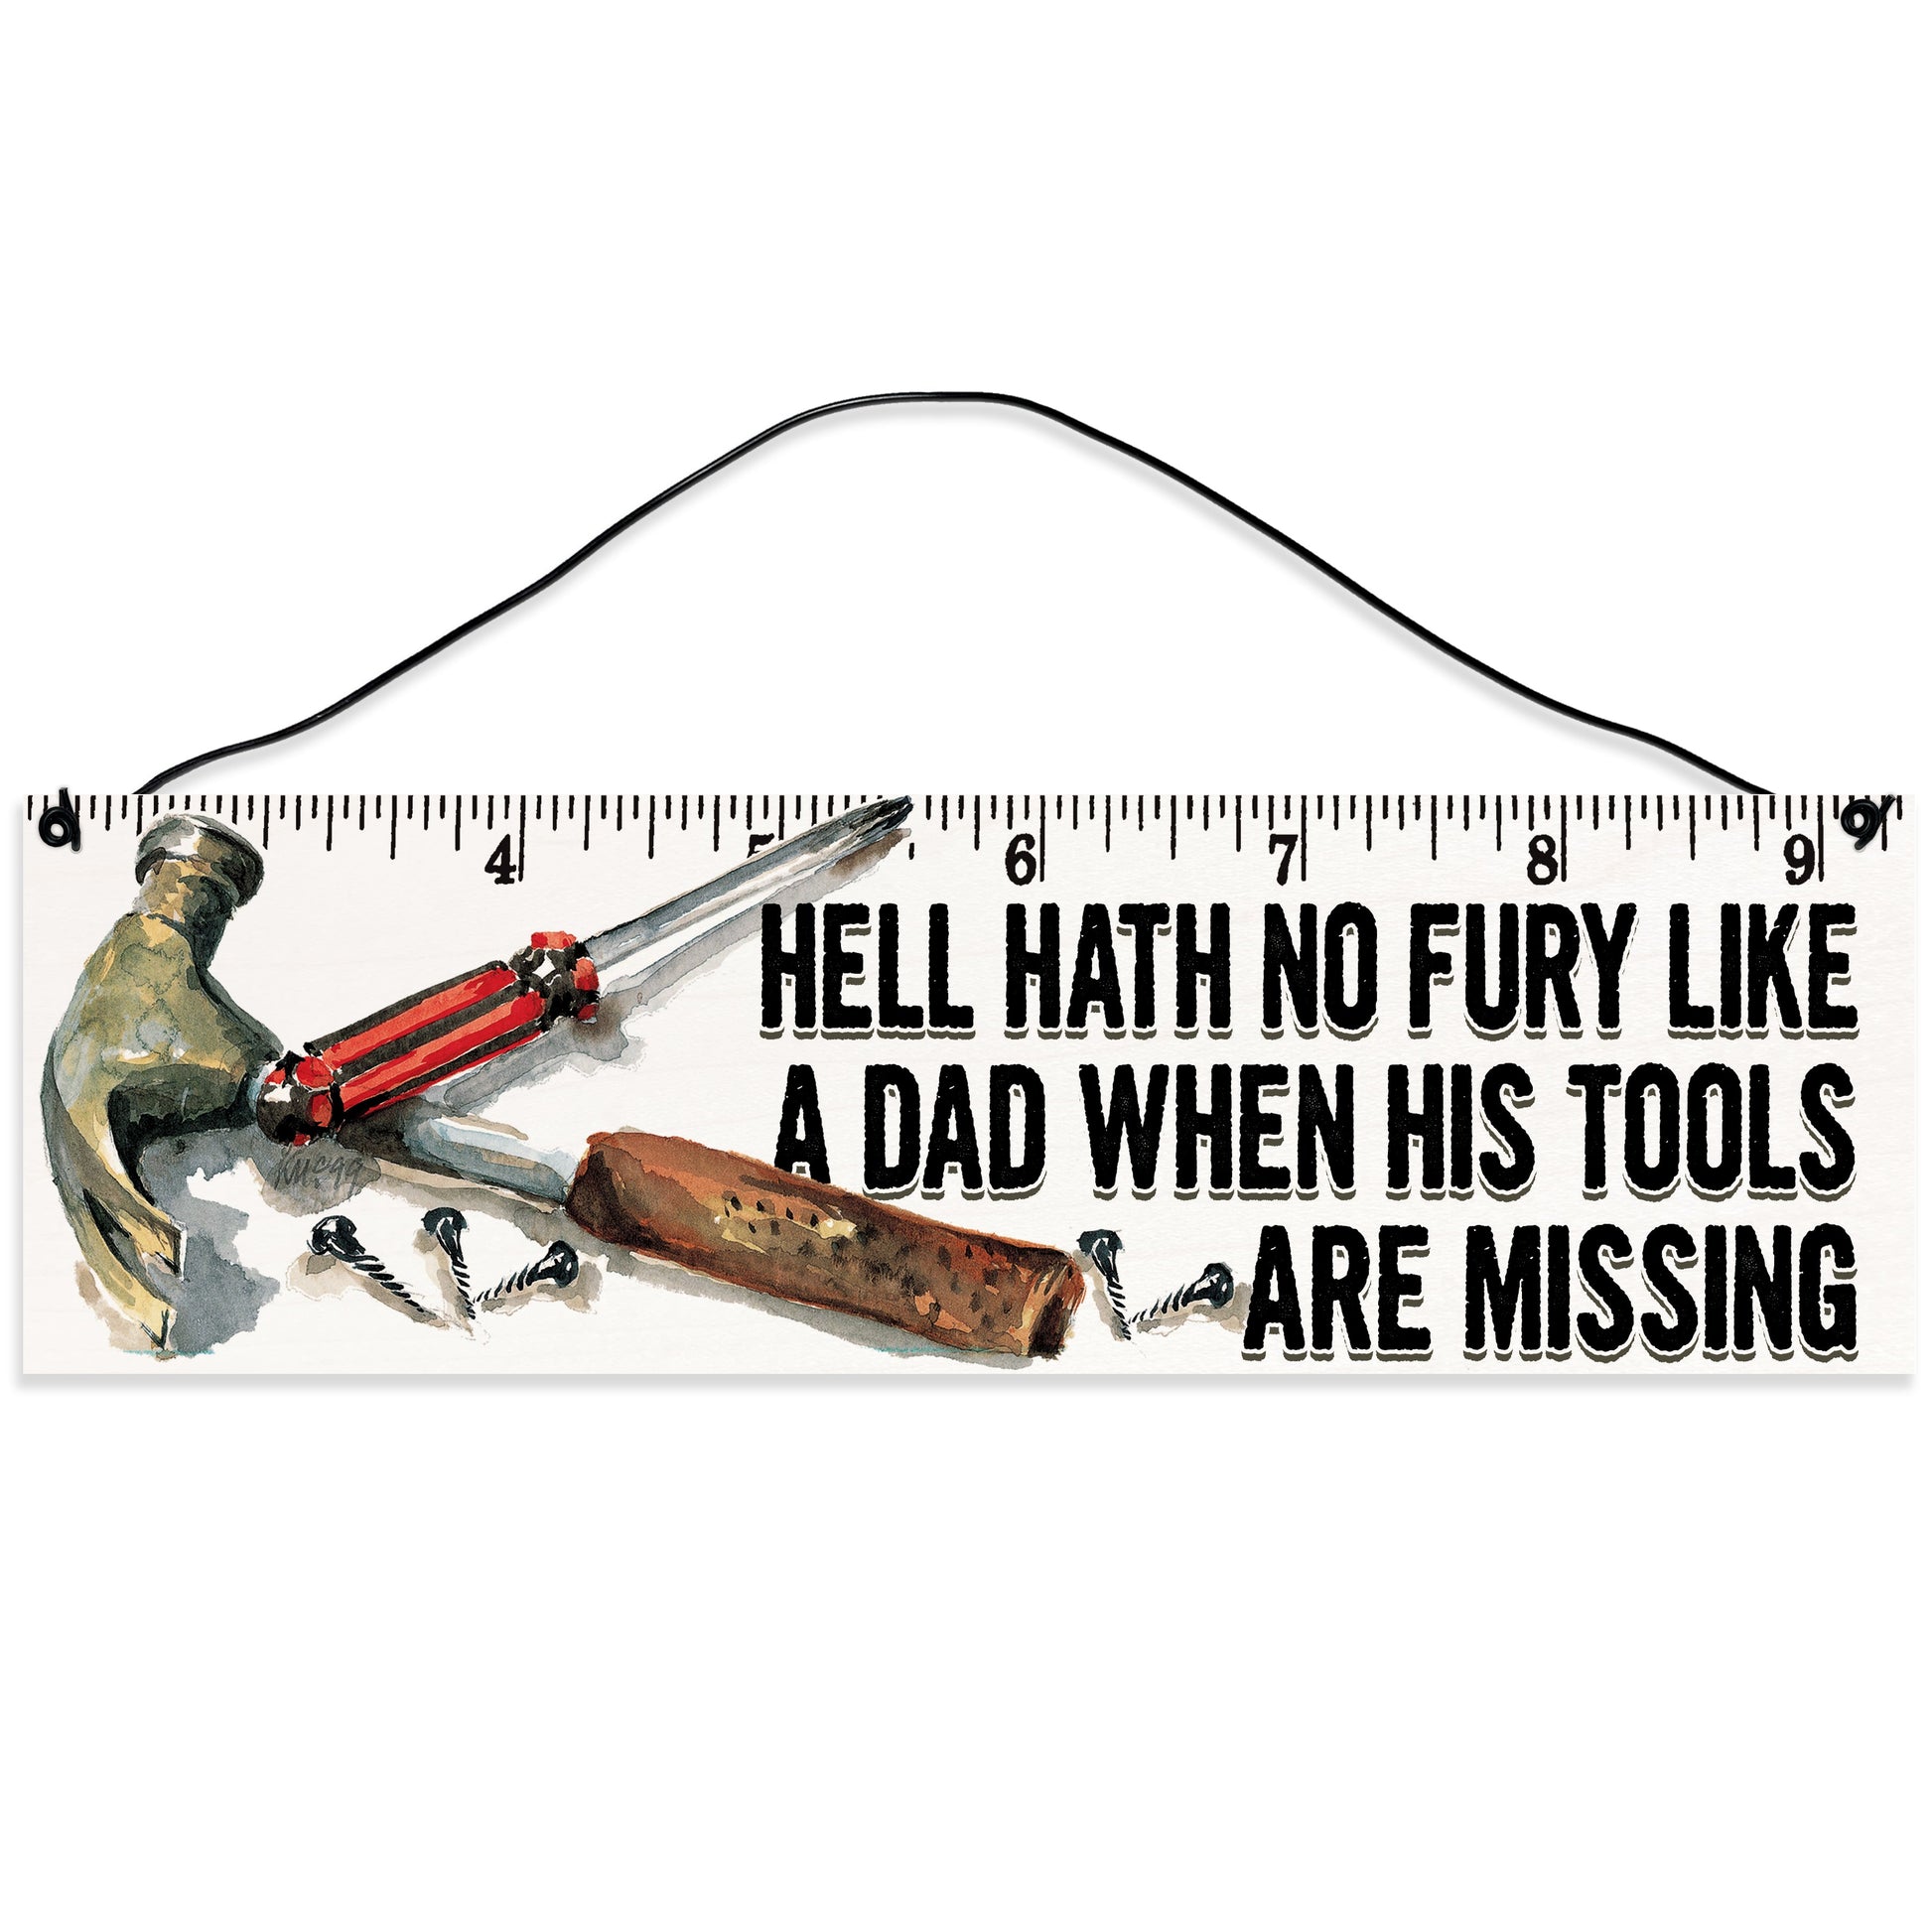 Sawyer's Mill - Hell Hath No Fury Like a Dad Whose Tools are Missing. Wood Sign for Home or Office. Measures 3x10 inches.